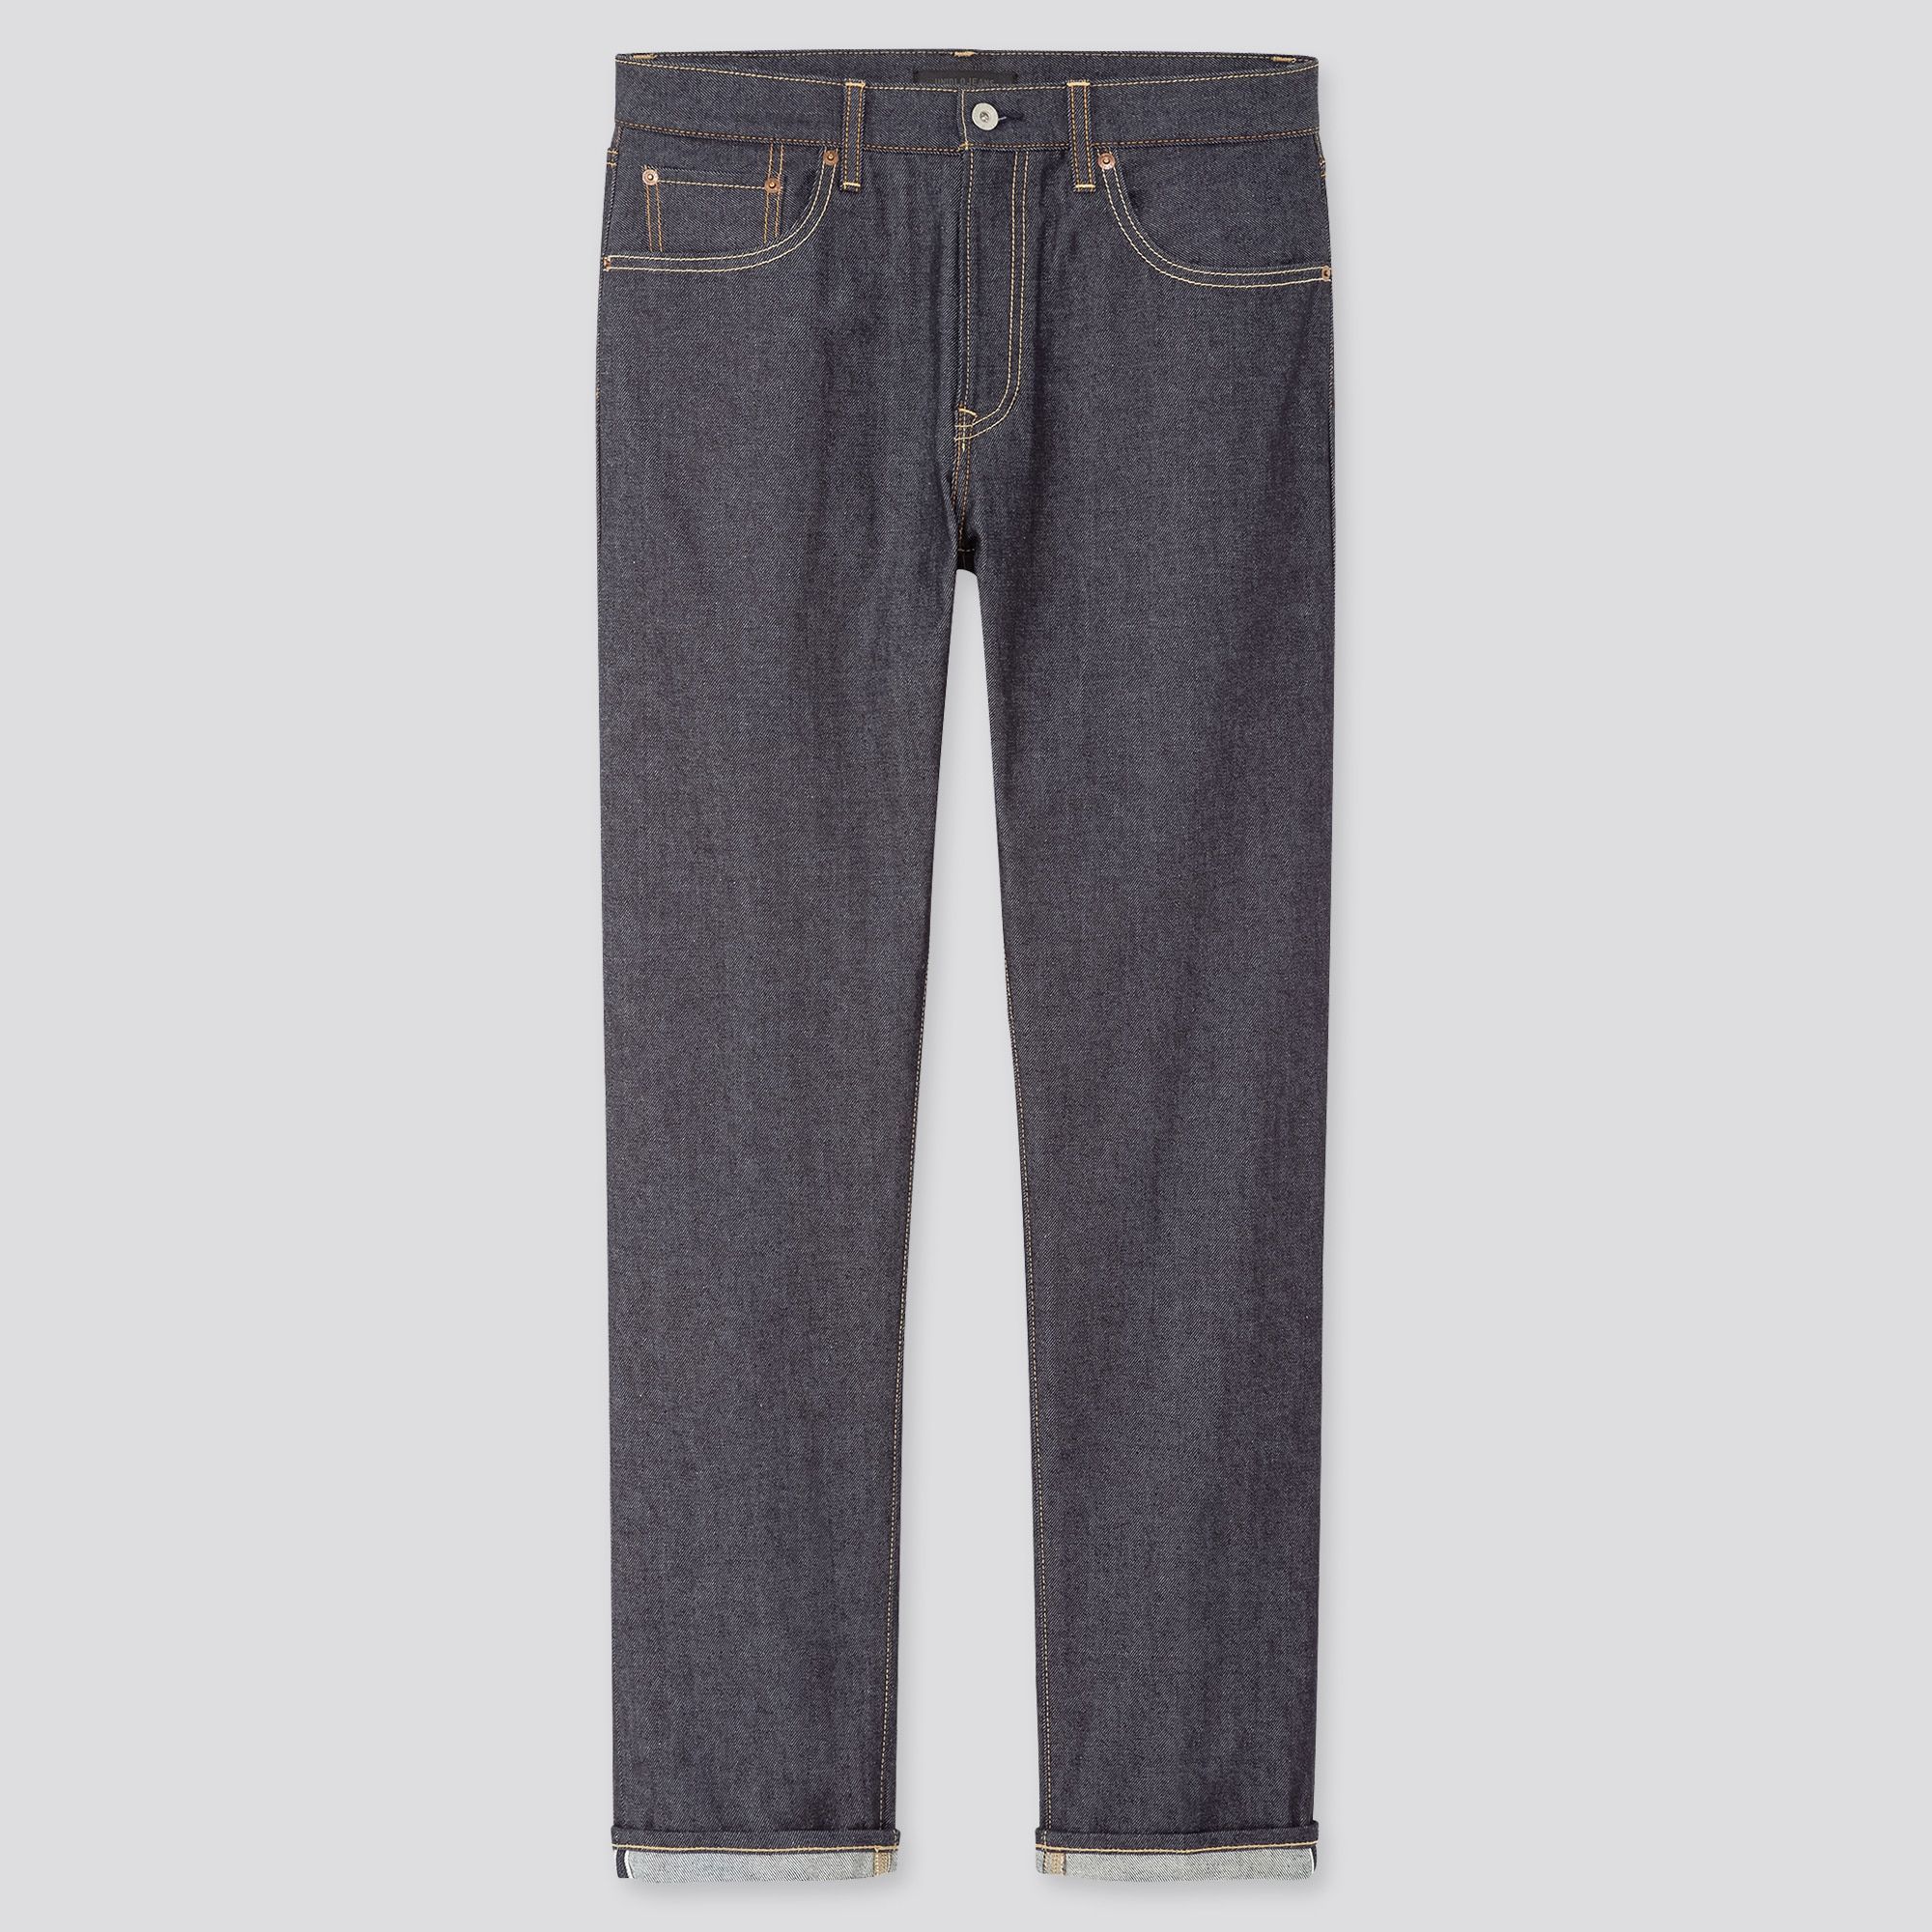 do uniqlo jeans shrink